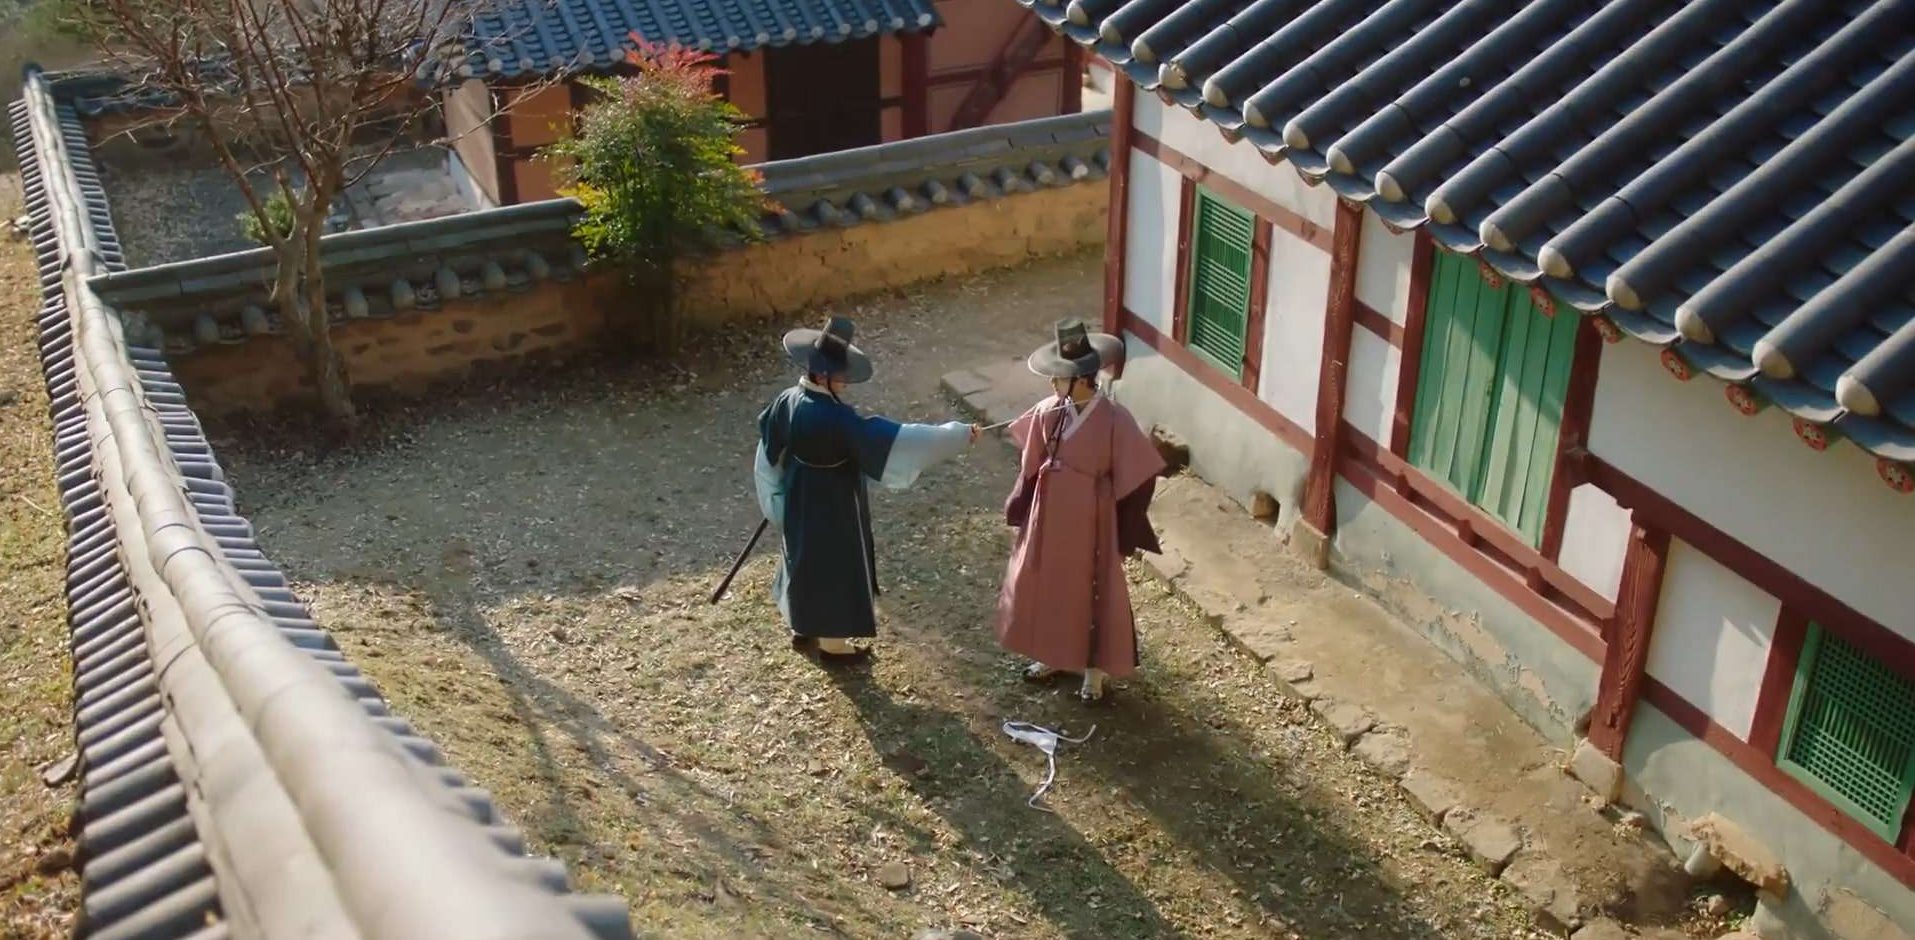 The Secret Romantic Guesthouse Episode 13: Release Date, Recap & Streaming Guide